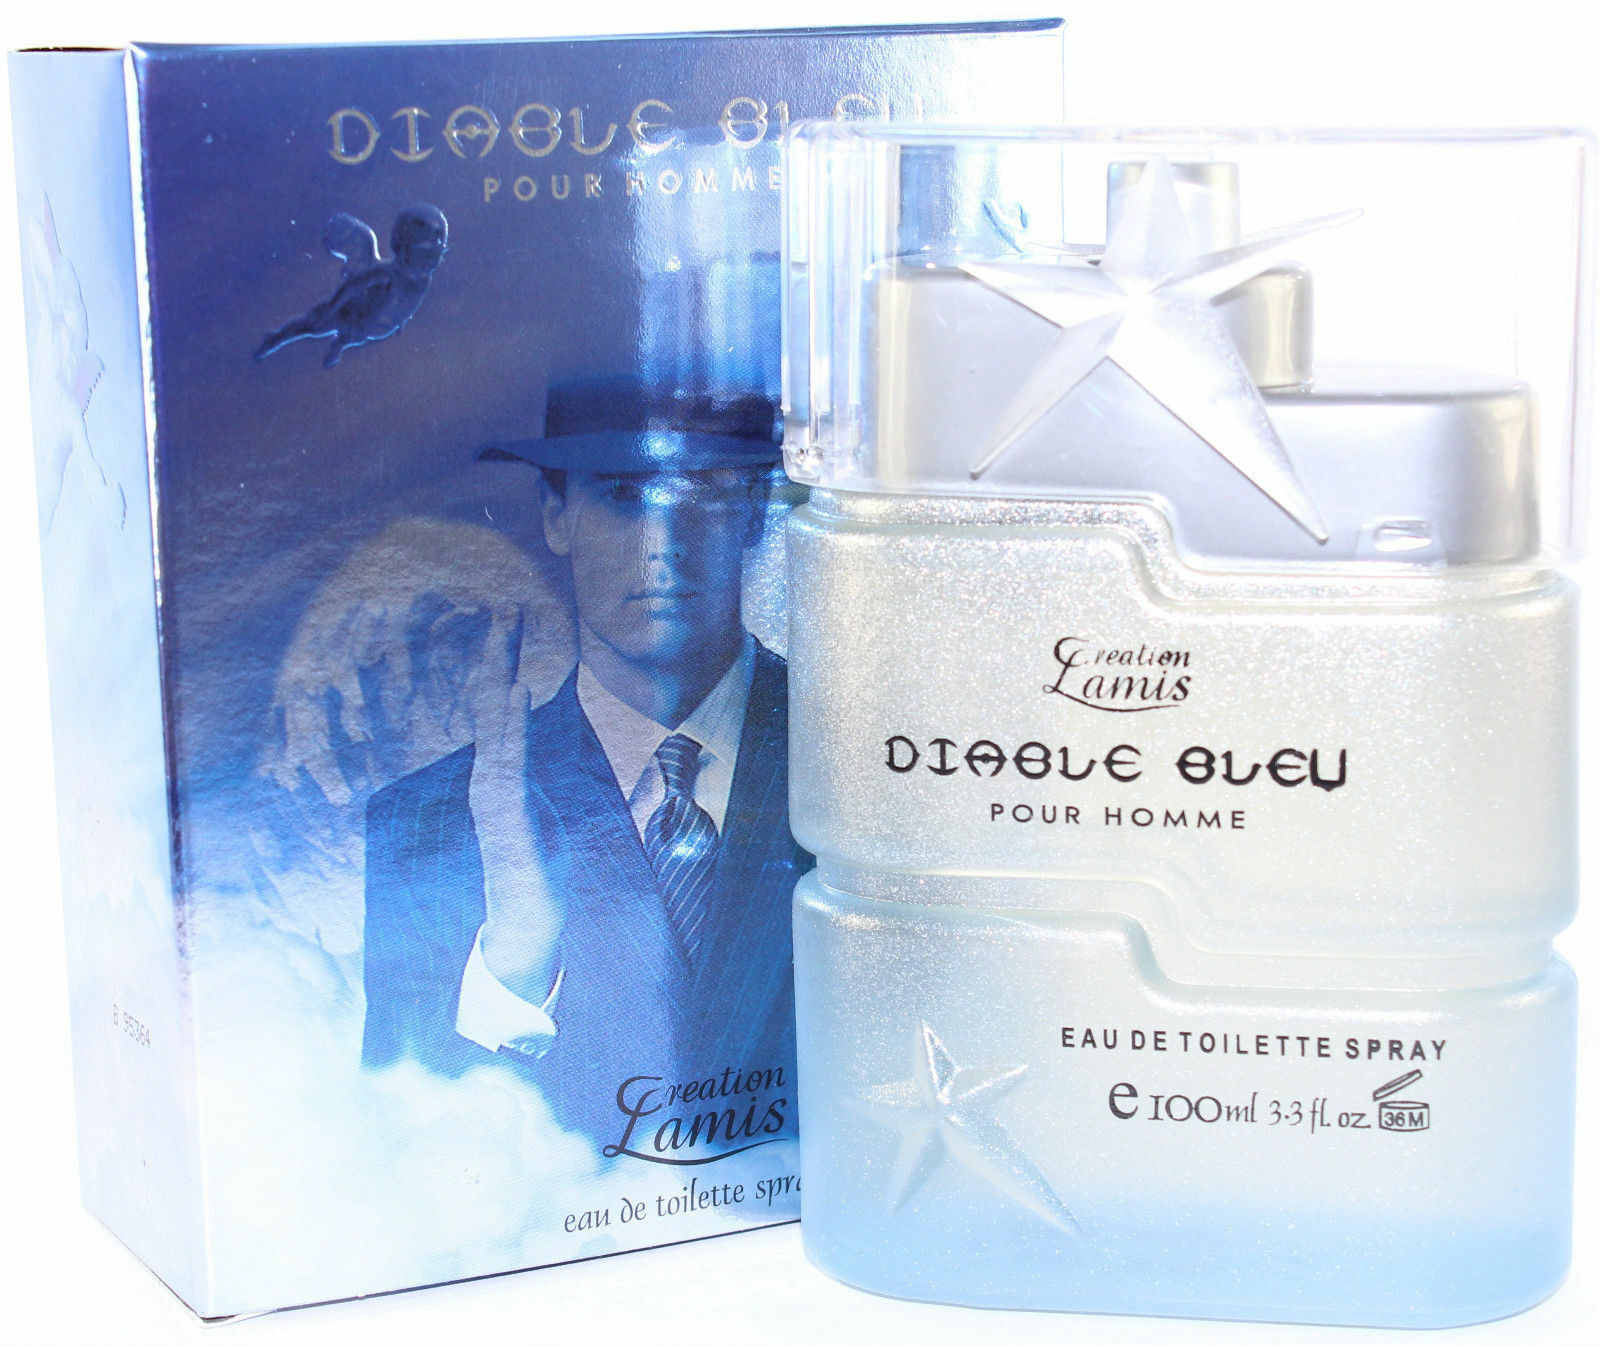 DIABLE BLEU by Creation Lamis 3.4 / 3.3 Oz EDT Spray for Men * SEALED IN BOX *